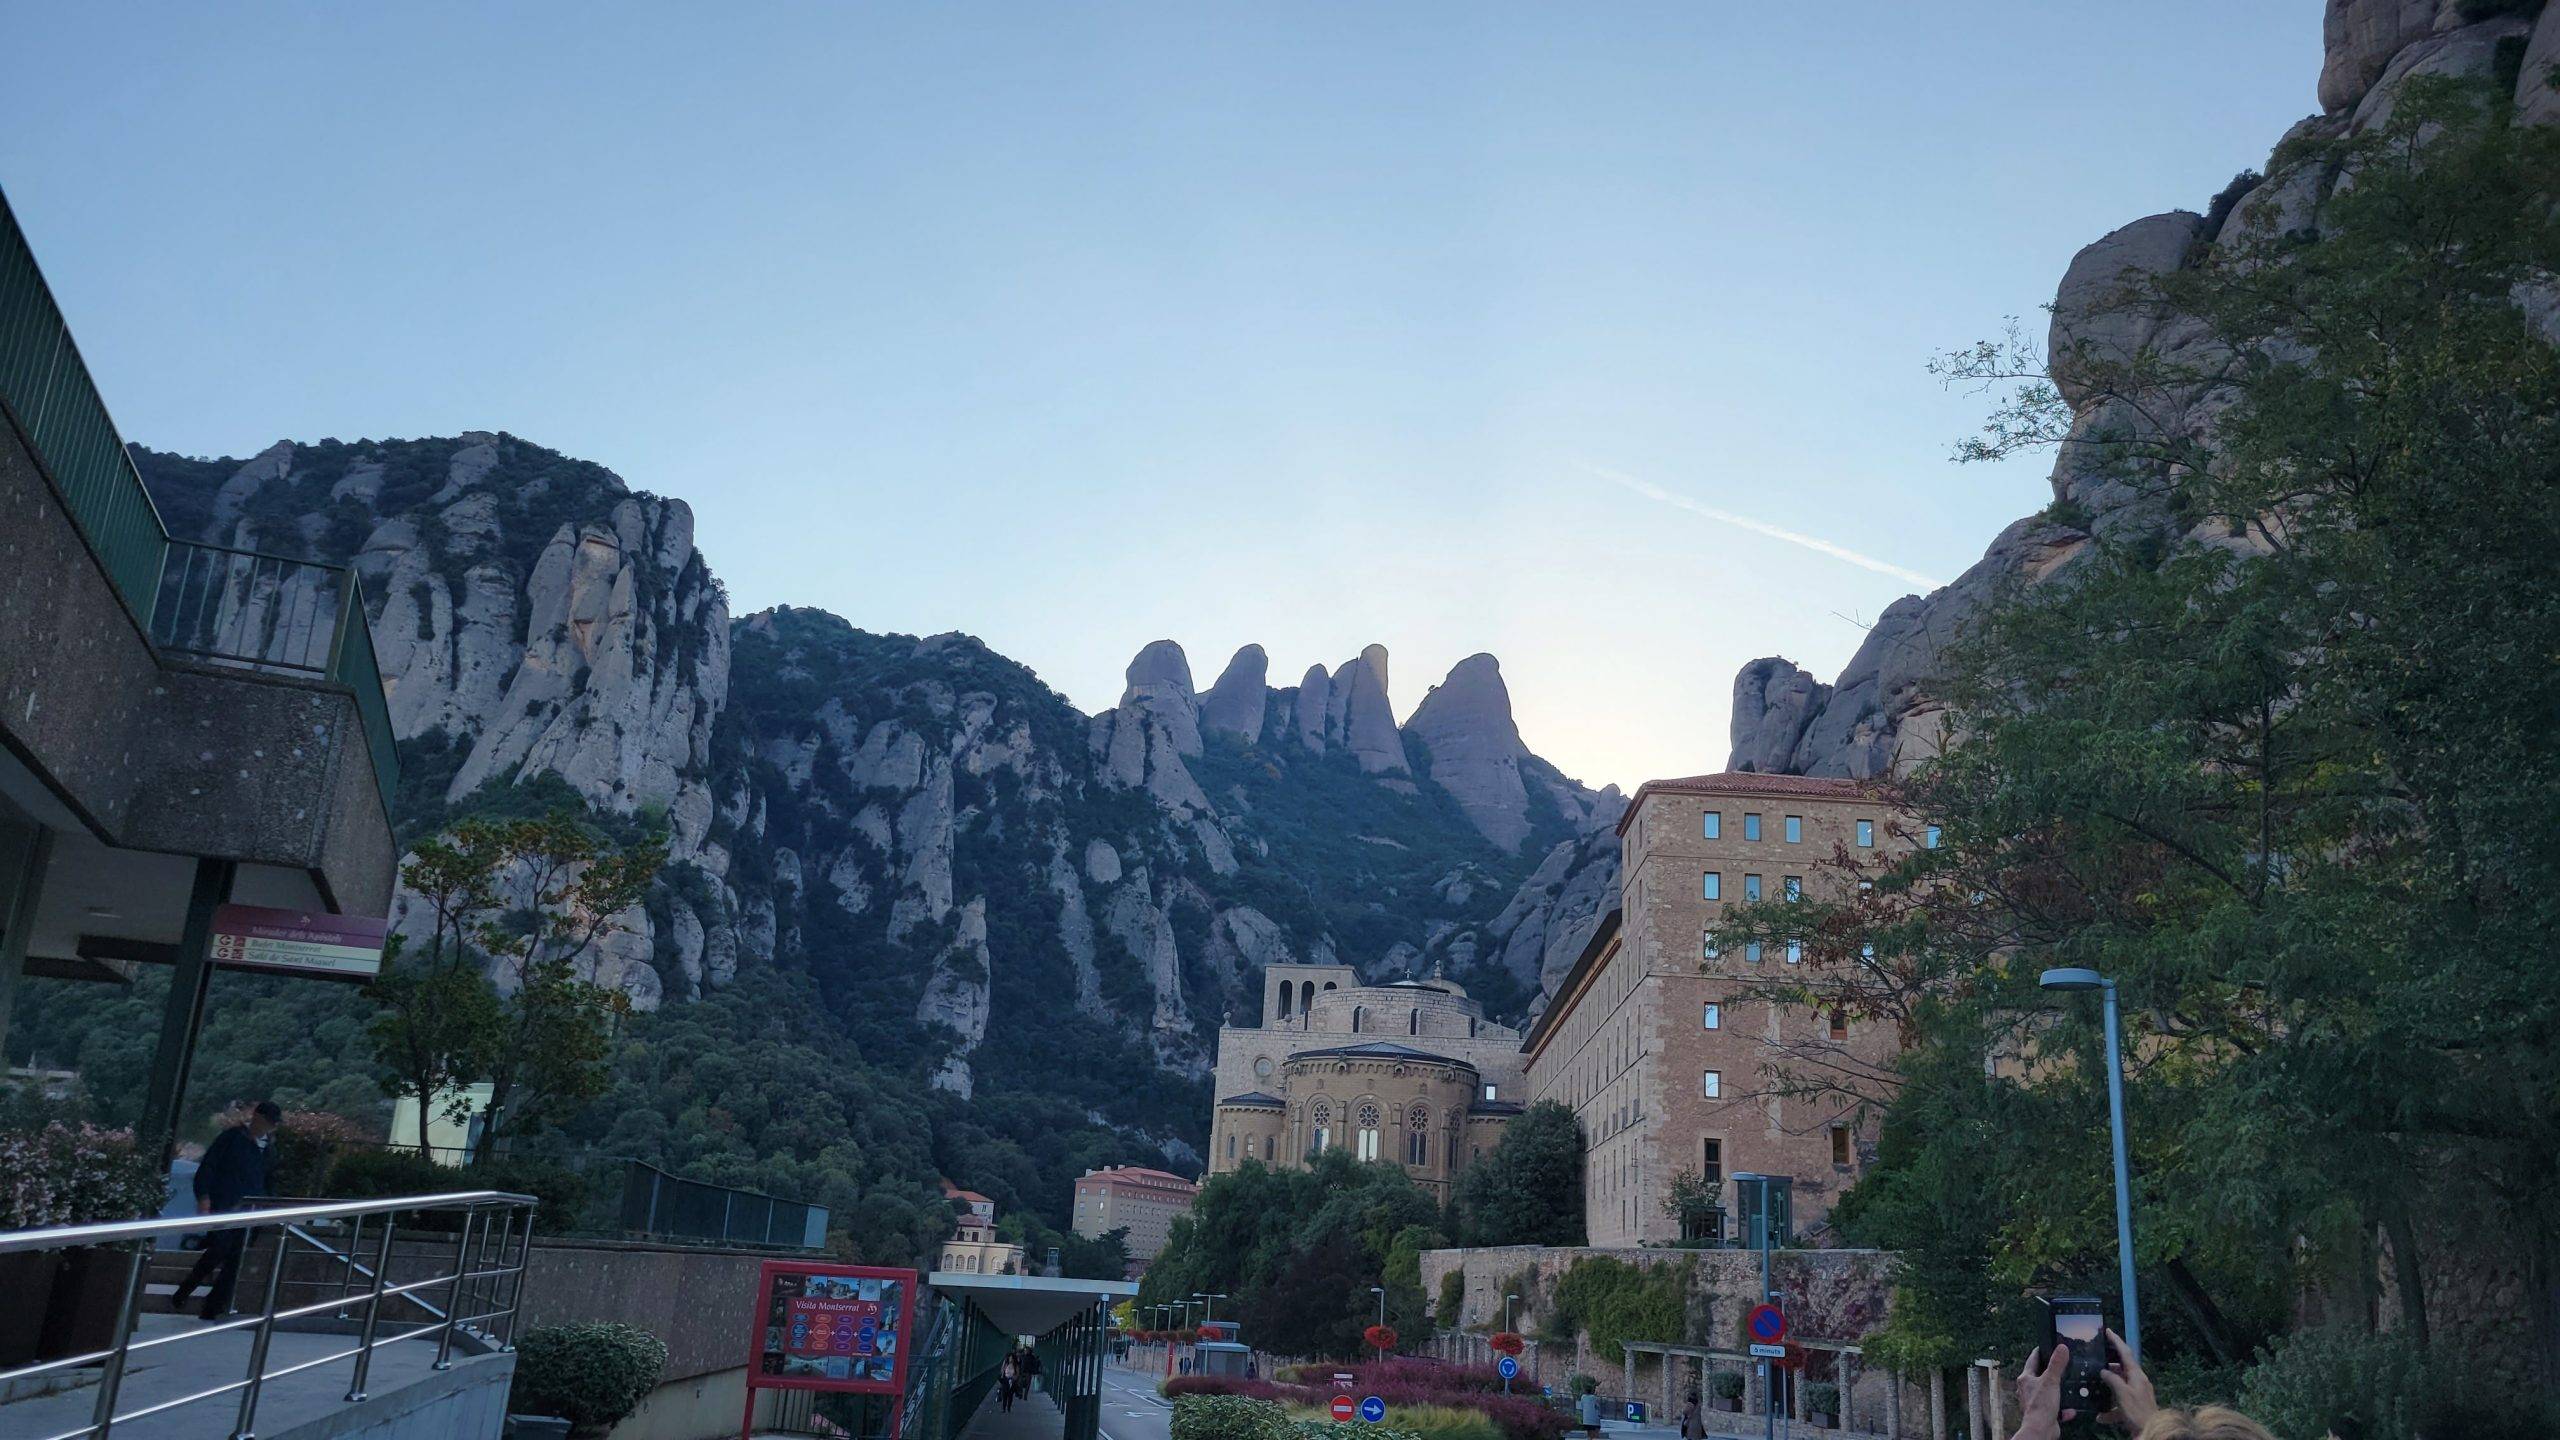 Montserrat village and mountains in Barcelona